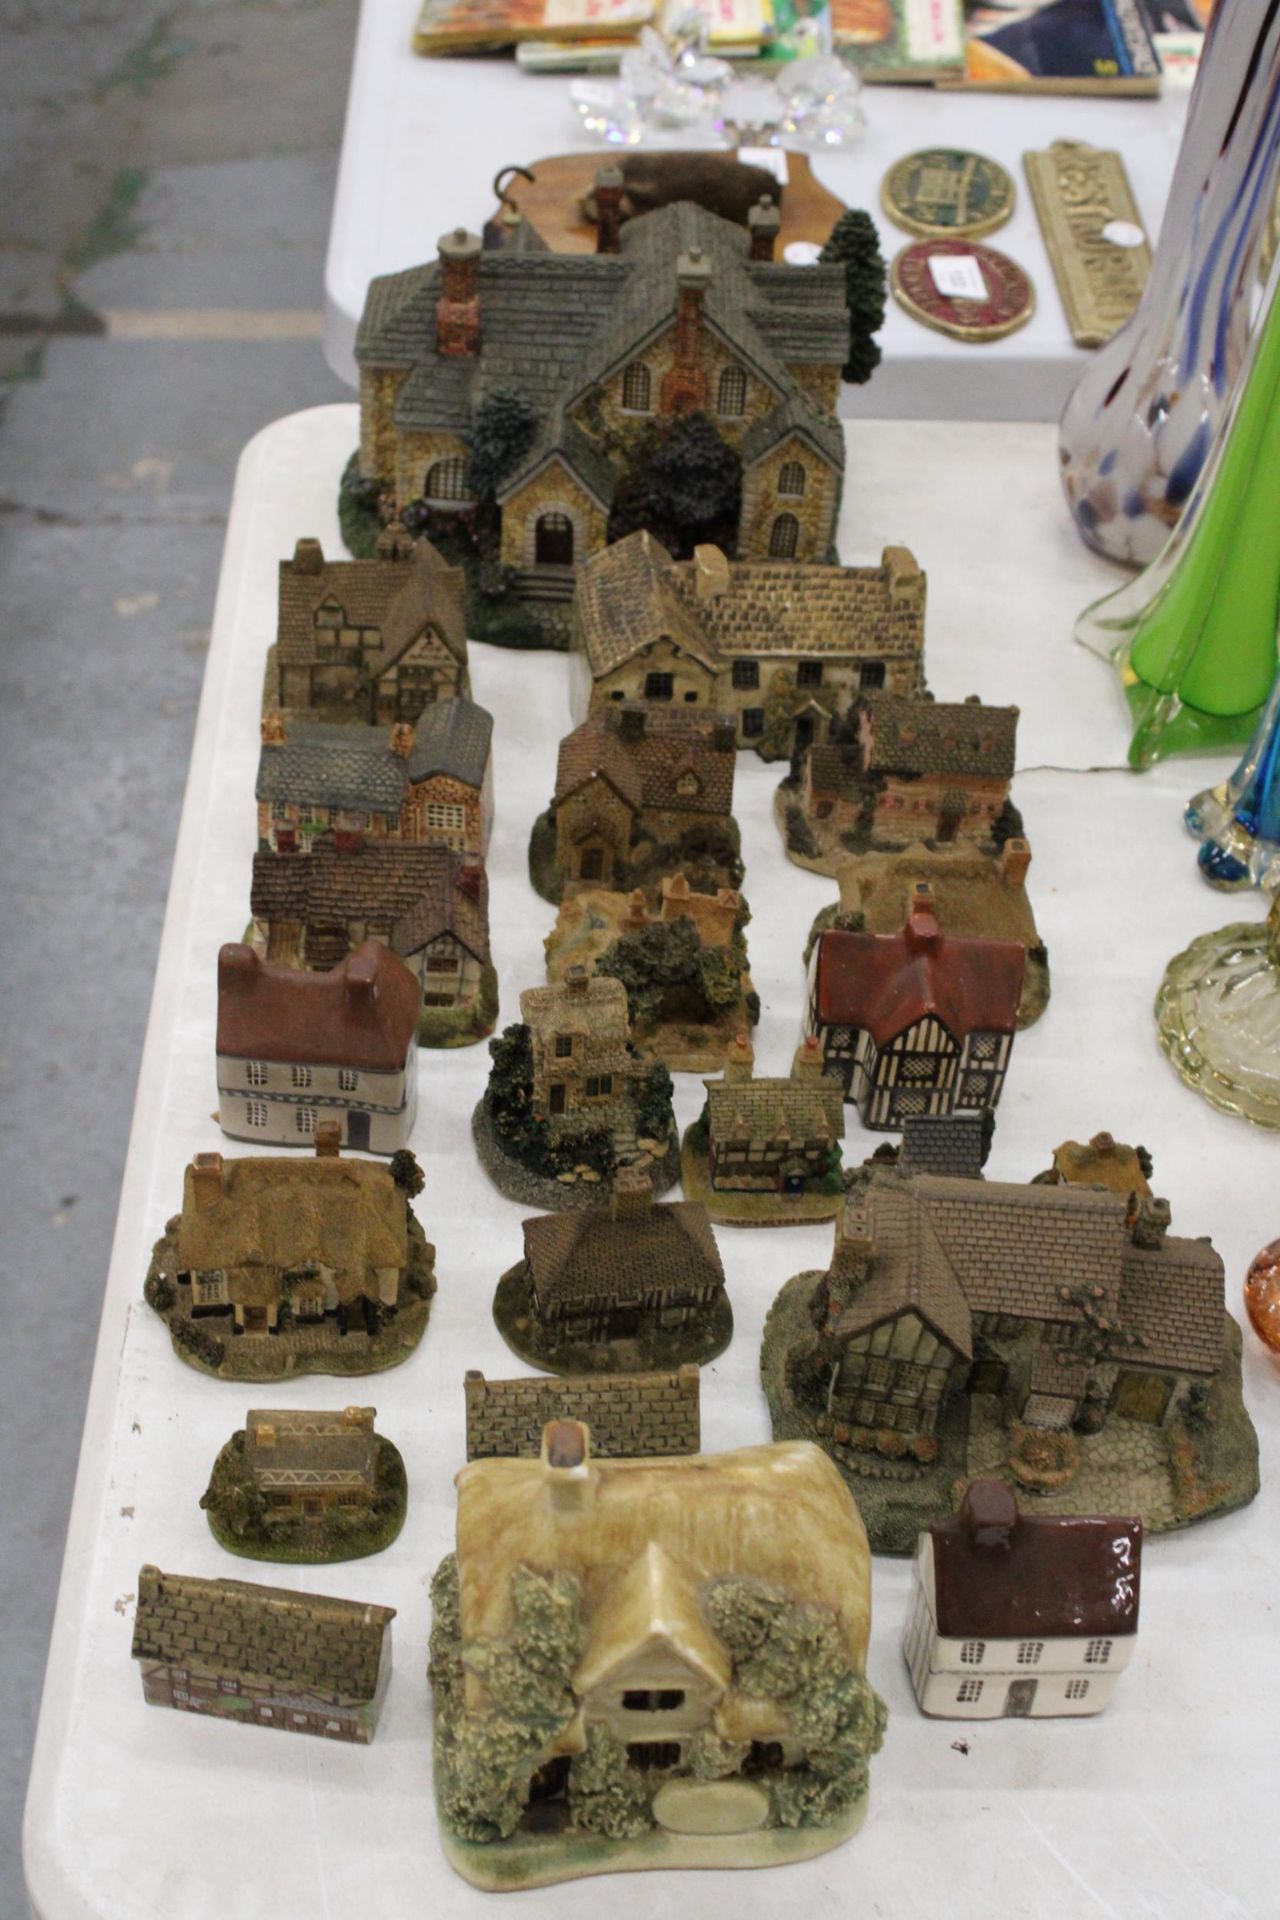 A LARGE QUANTITY OF COLLECTABLE COTTAGES - 23 IN TOTAL